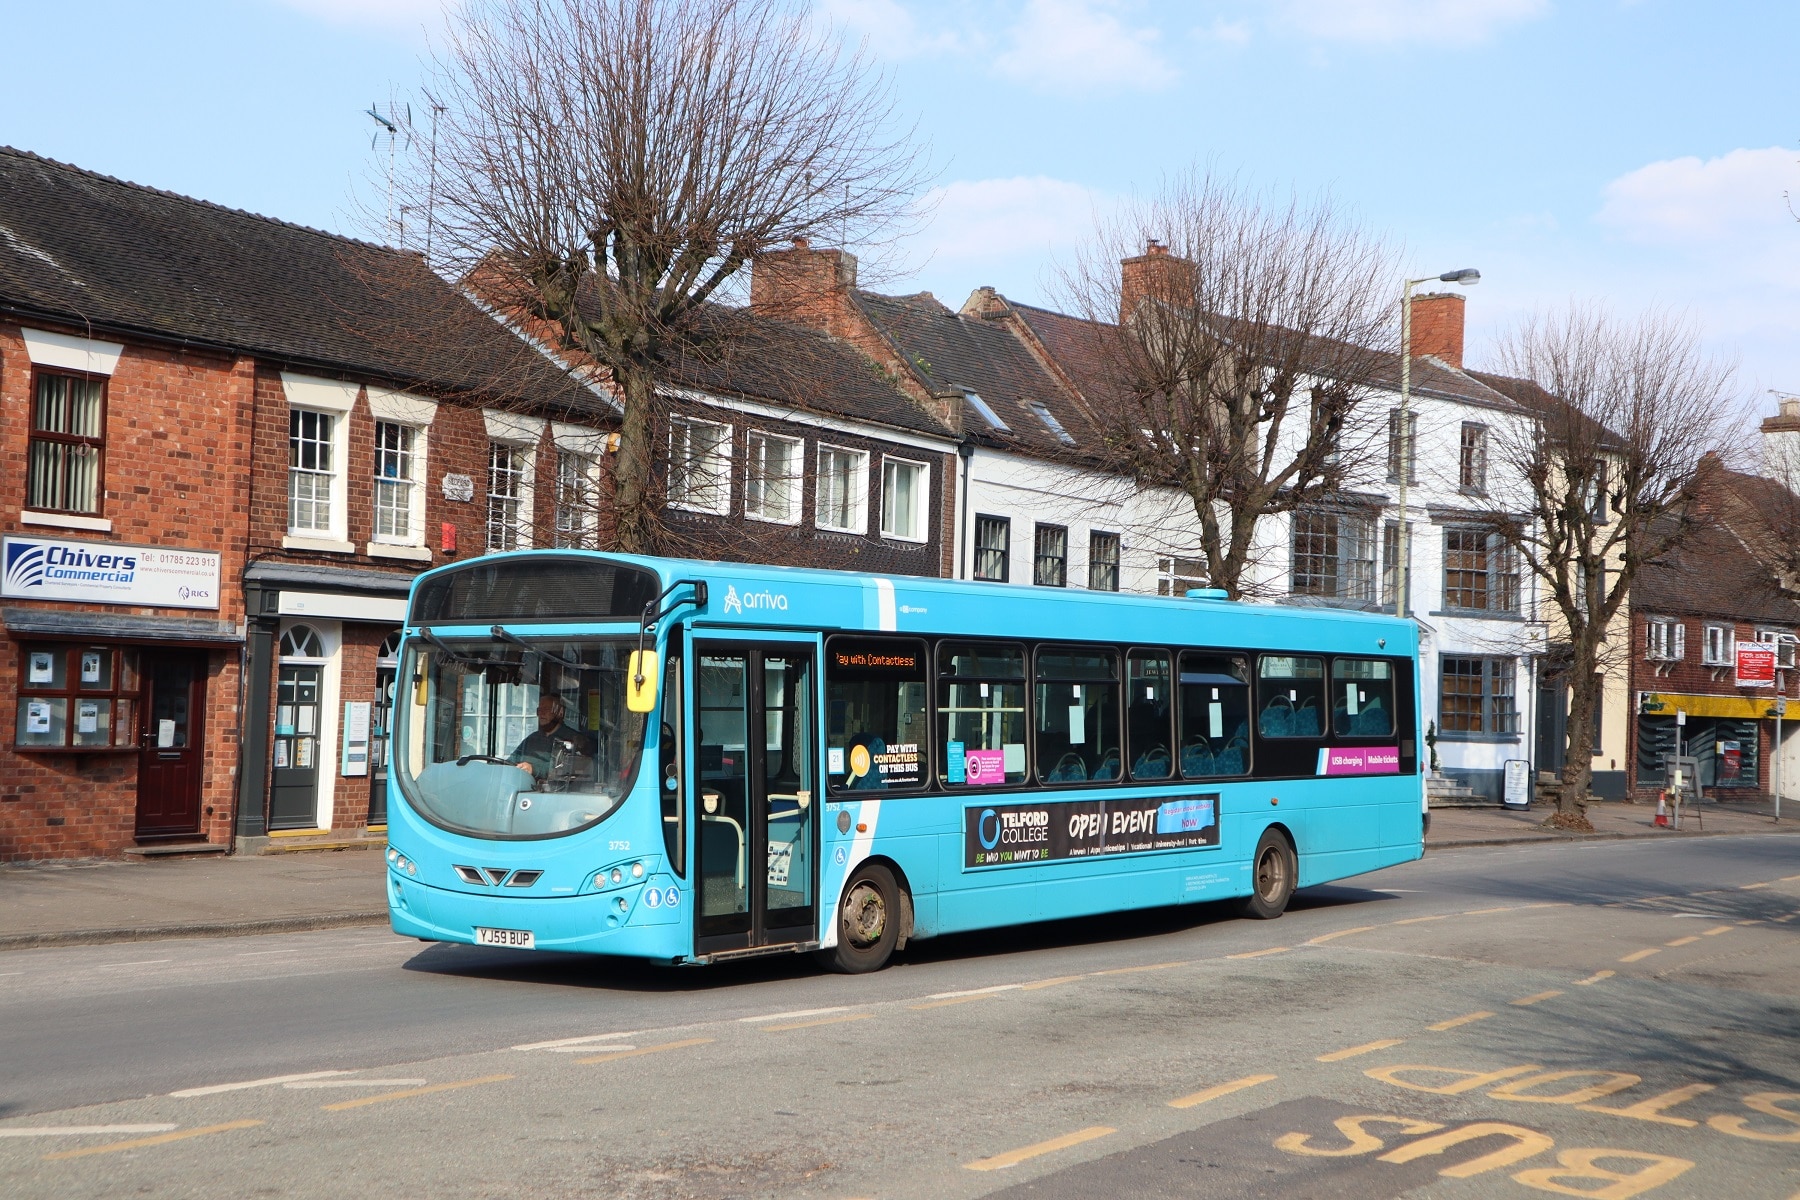 Enhanced Partnerships are coming to bus services in England outside London